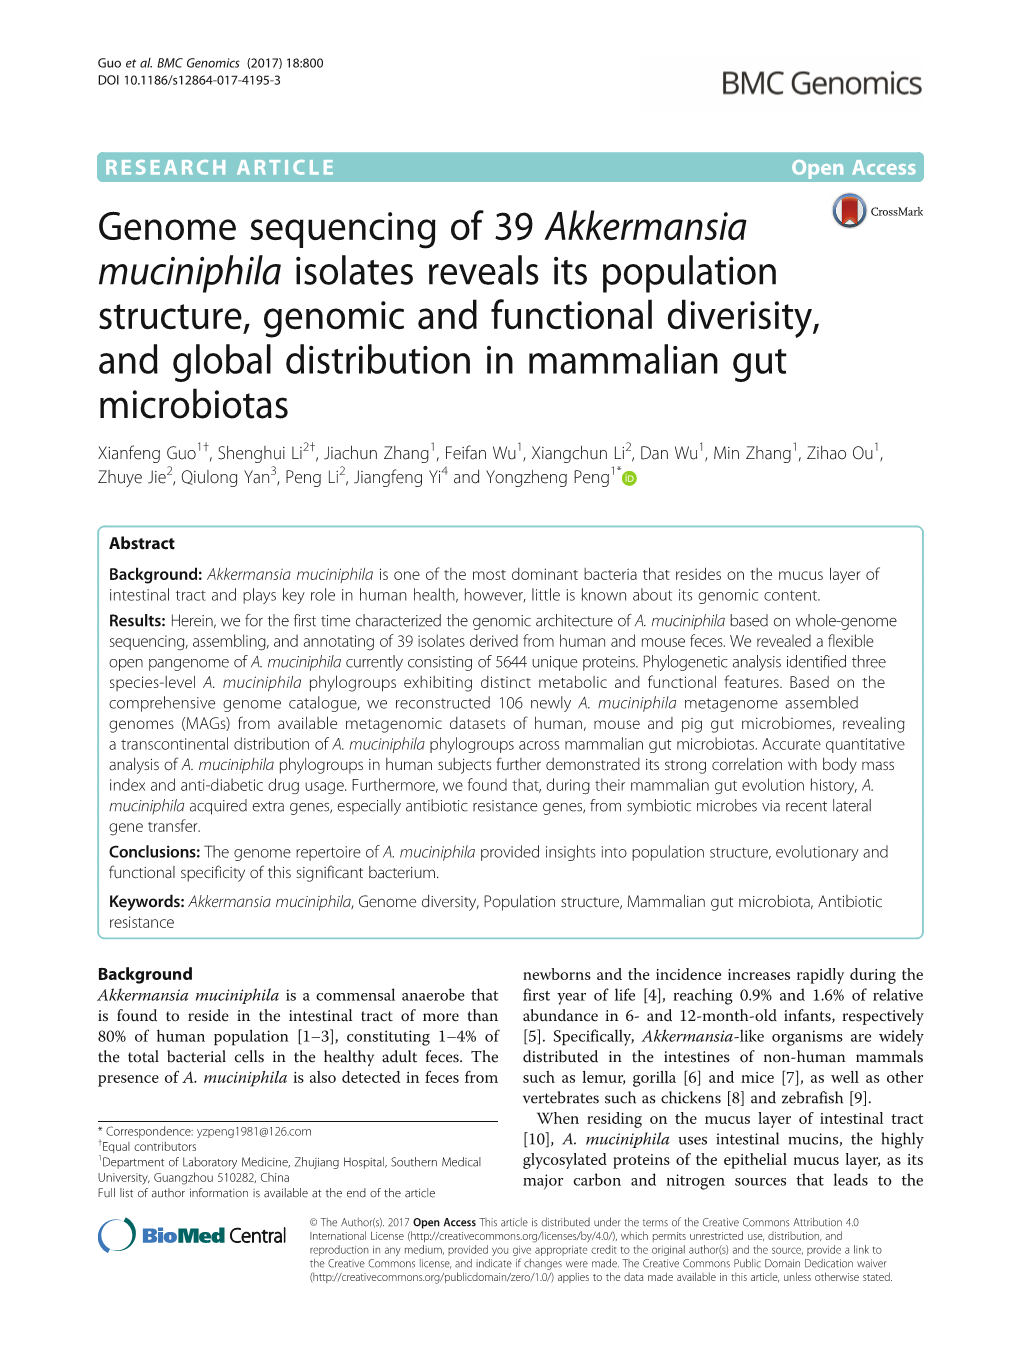 Genome Sequencing of 39 Akkermansia Muciniphila Isolates Reveals Its Population Structure, Genomic and Functional Diverisity, An